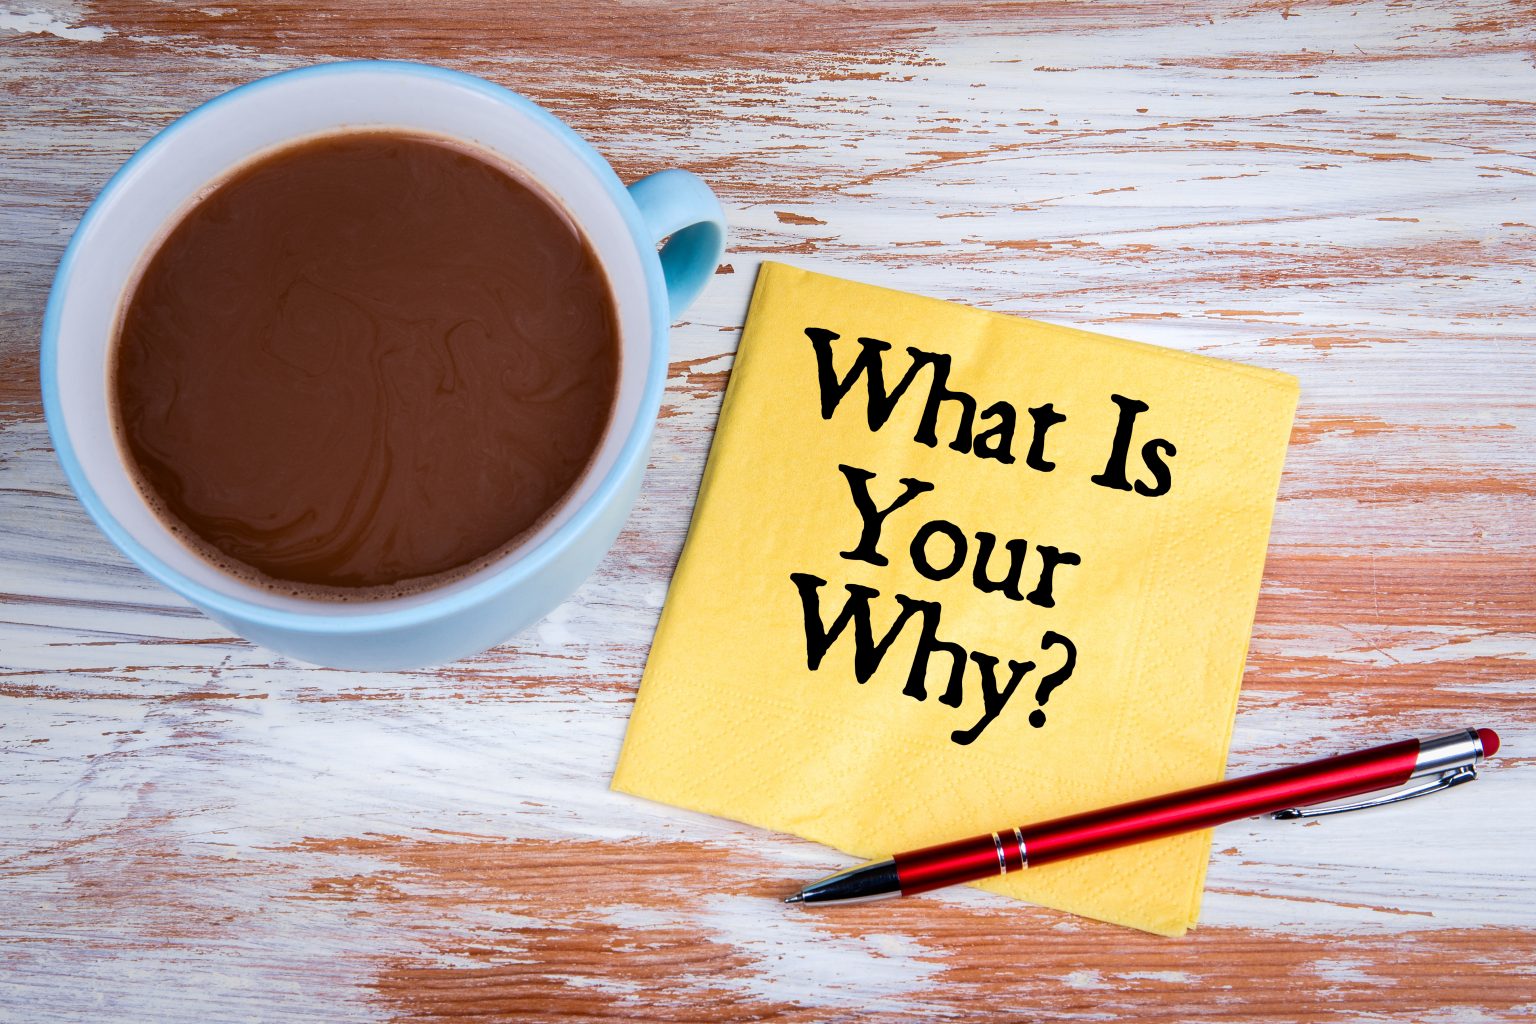 A cup of hot chocolate next to a yellow napkin with "what is your why?" printed on it, accompanied by a red pen, all set on a wooden surface.